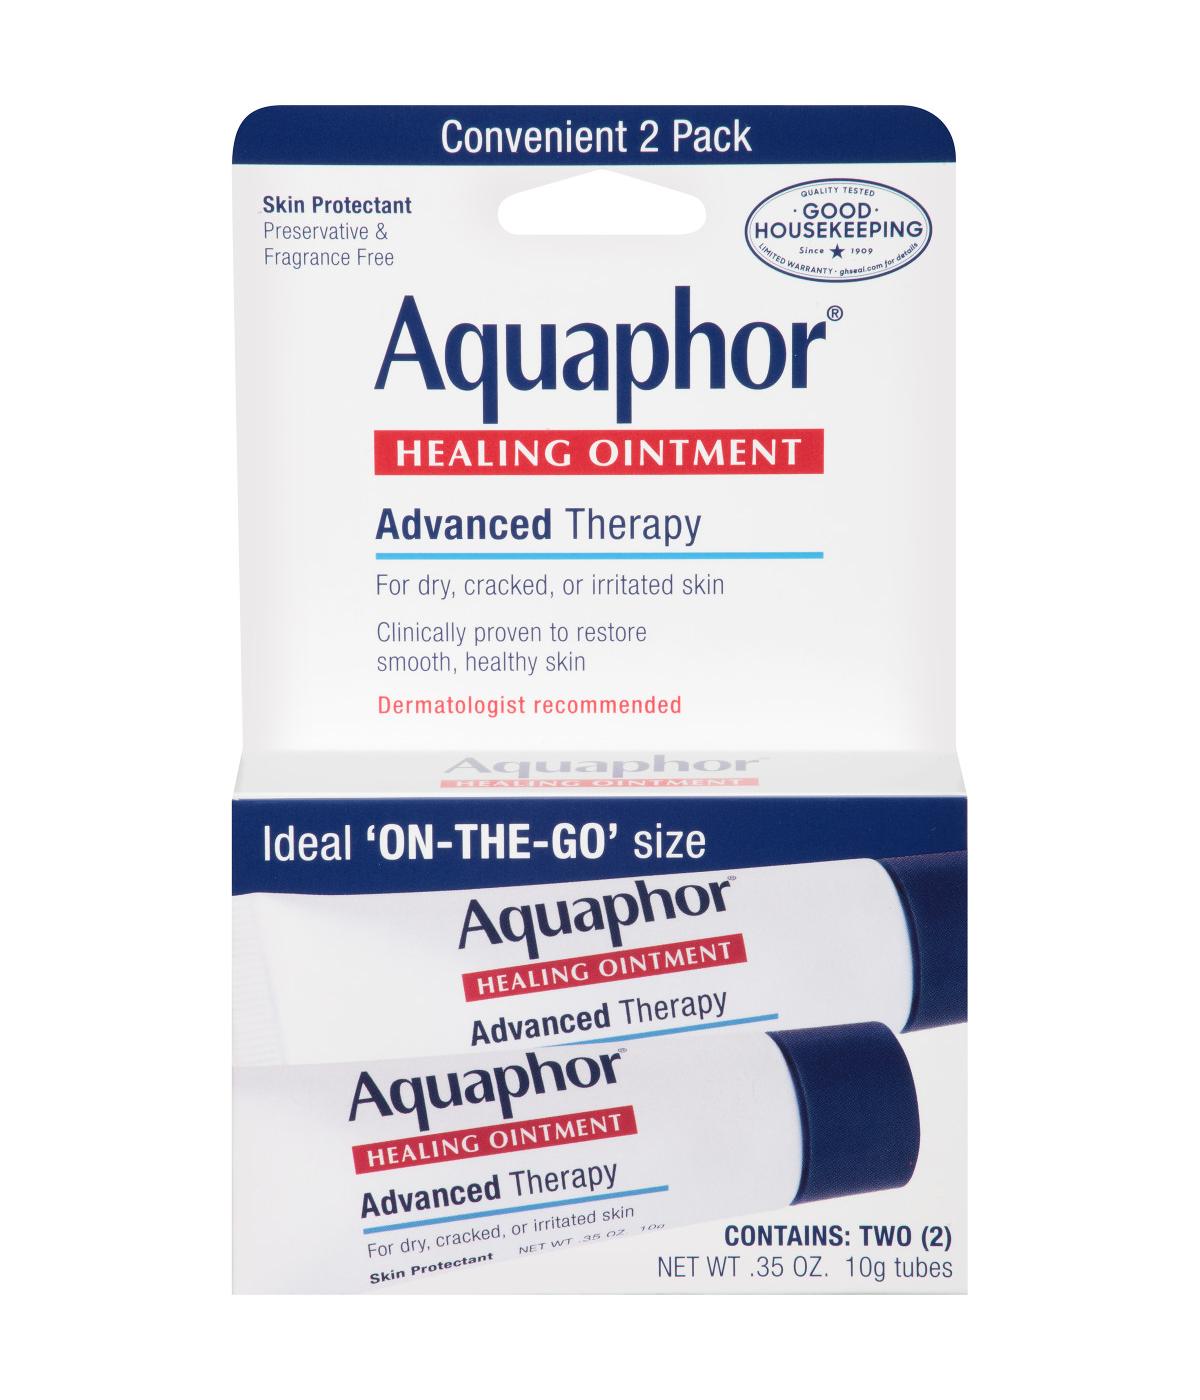 Aquaphor Advanced Therapy Healing Ointment Skin Protectant 2 Tubes; image 1 of 3